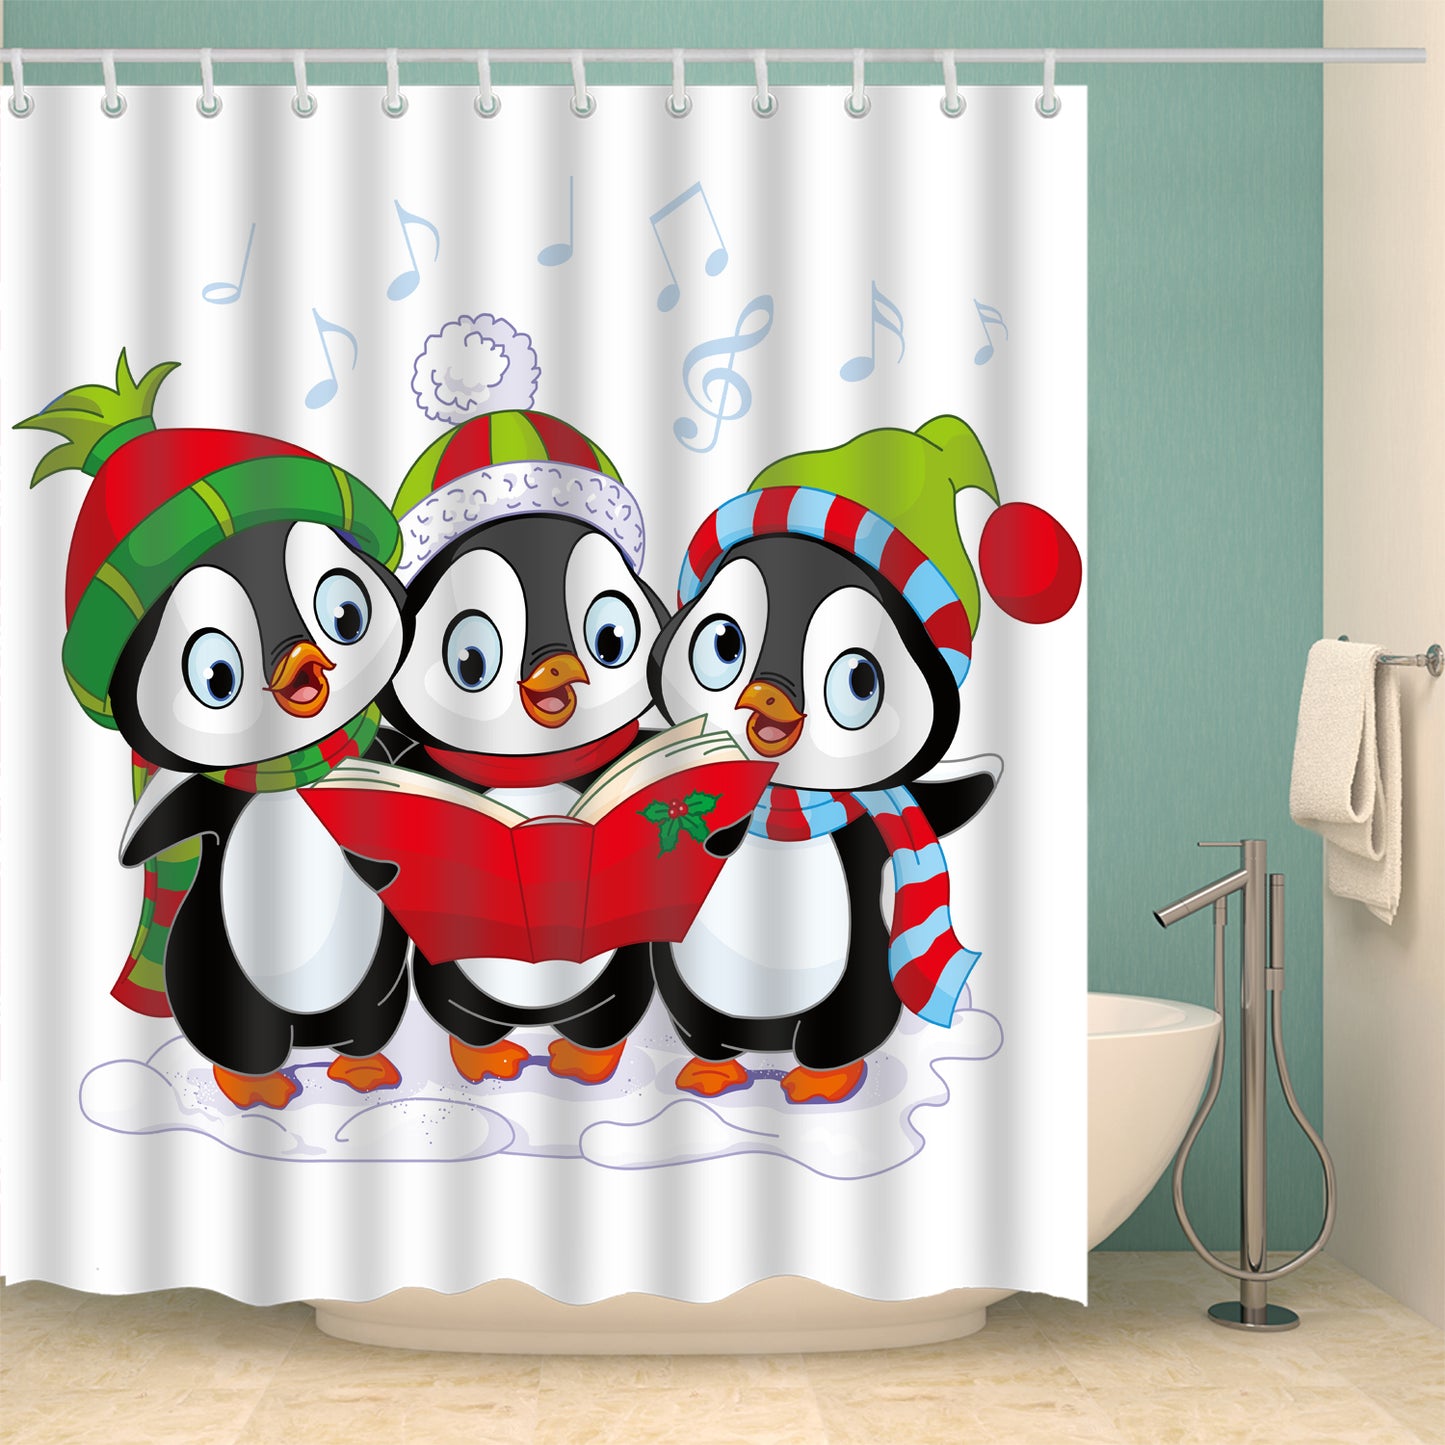 Happy Holidays with Christmas Penguins Shower Curtain